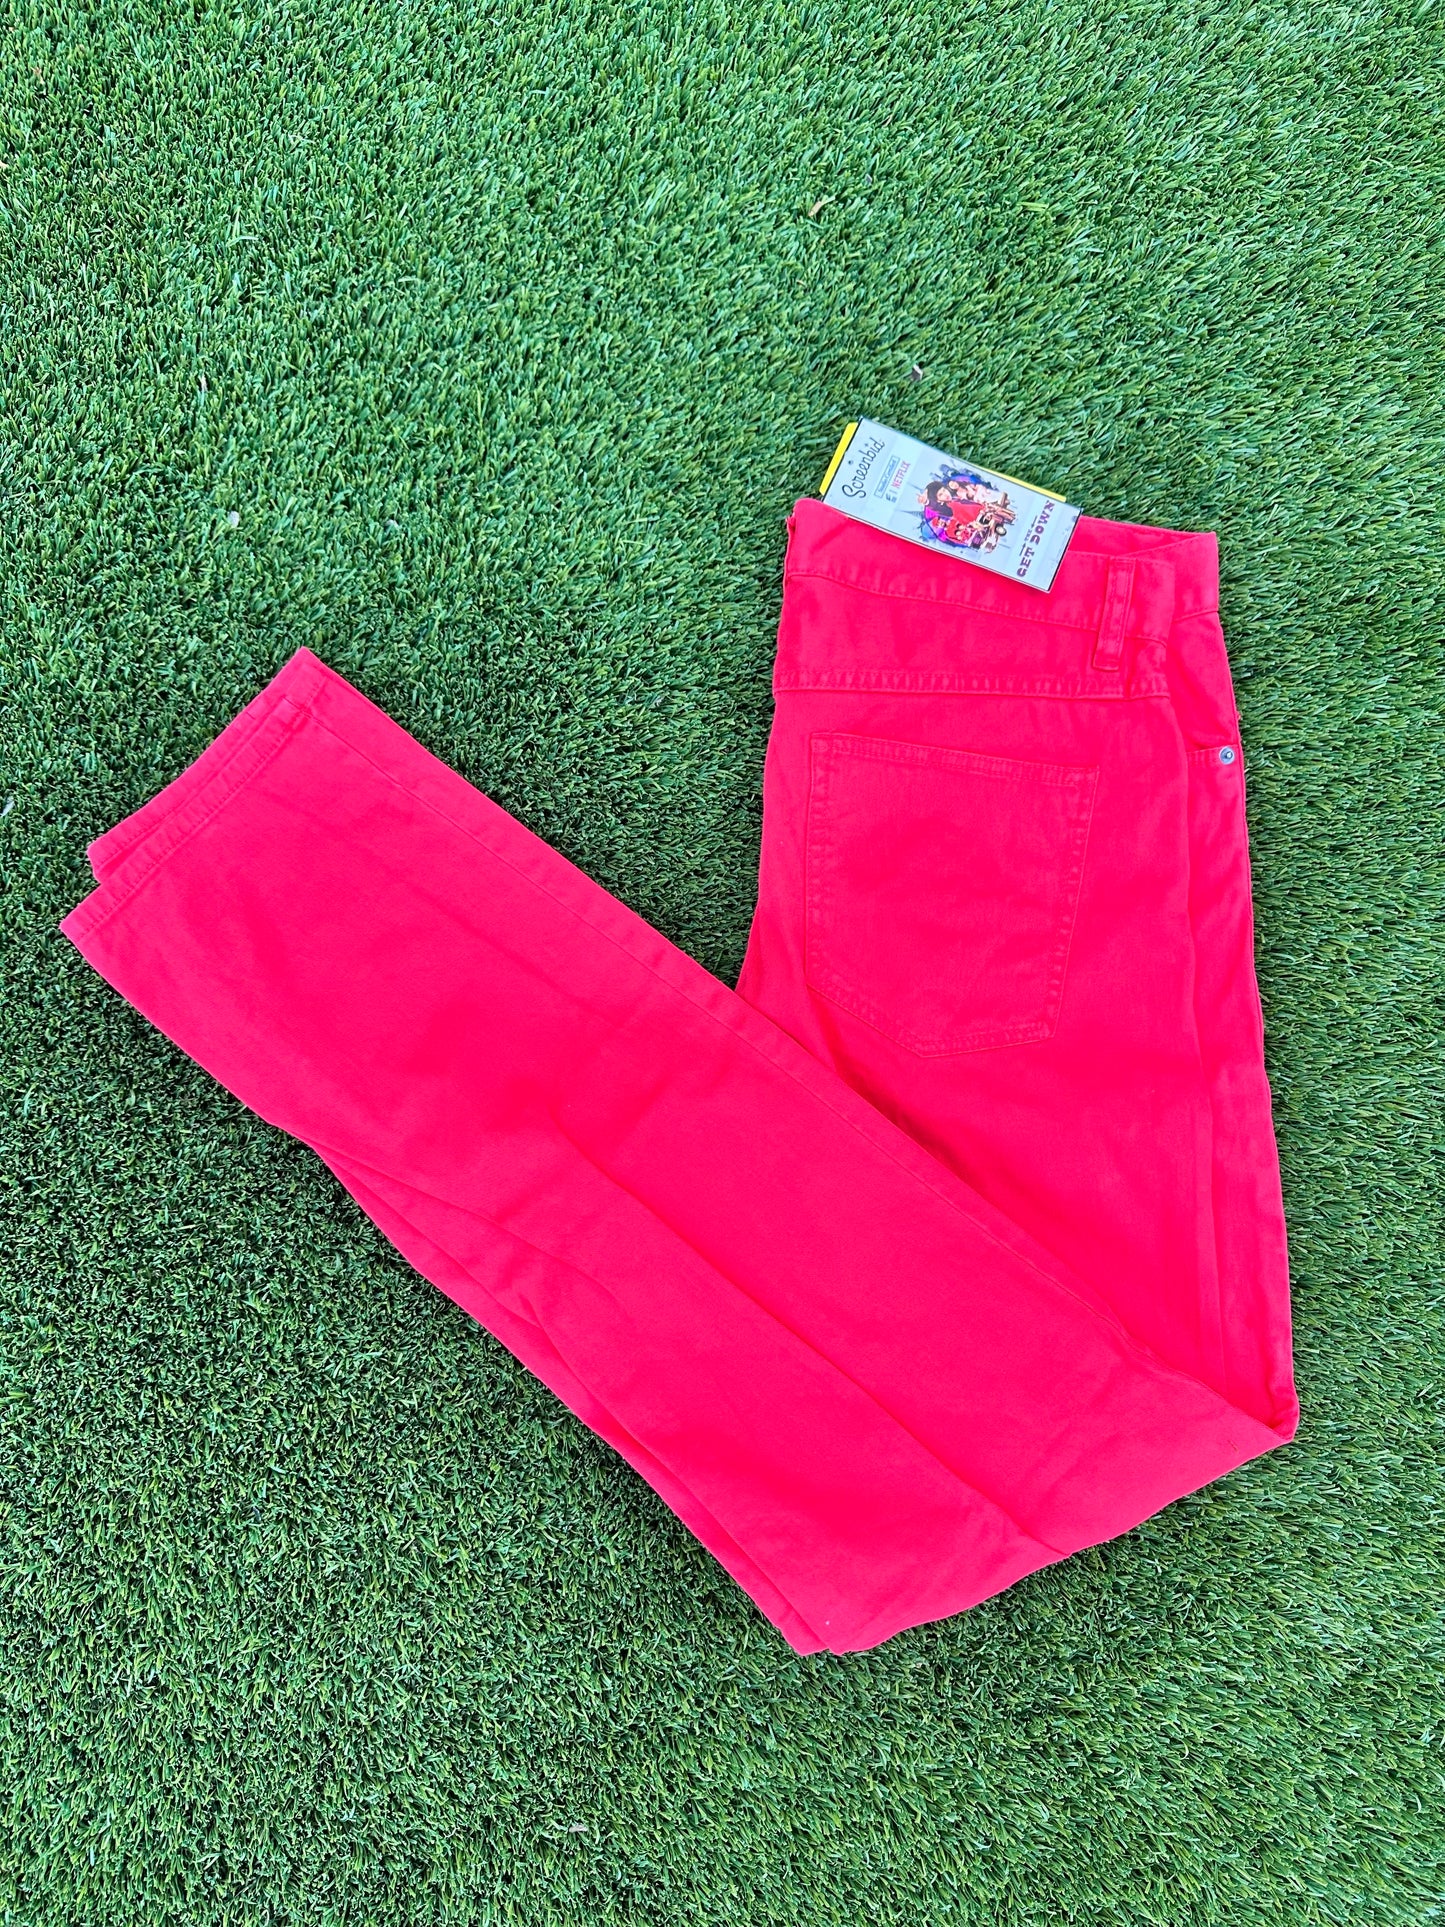 The Get Down: Shaolin H&M Red Denim Pants (33)